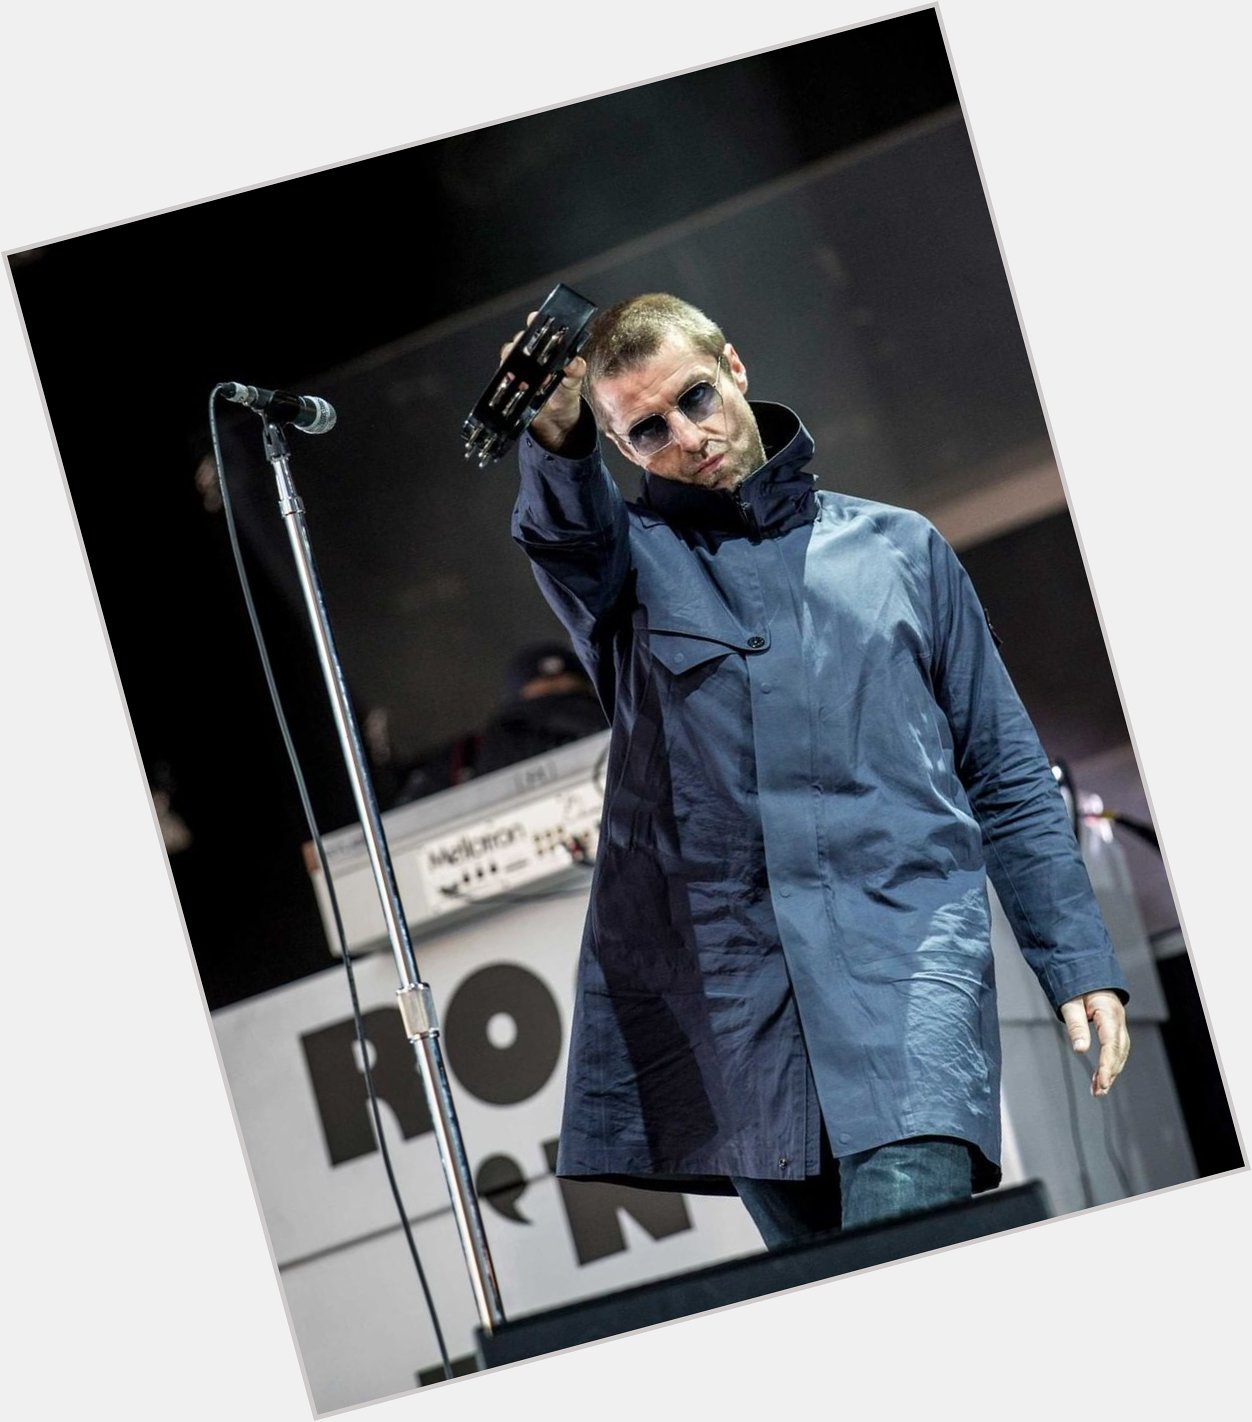 Happy 49 birthday to Oasis singer Liam Gallagher! 